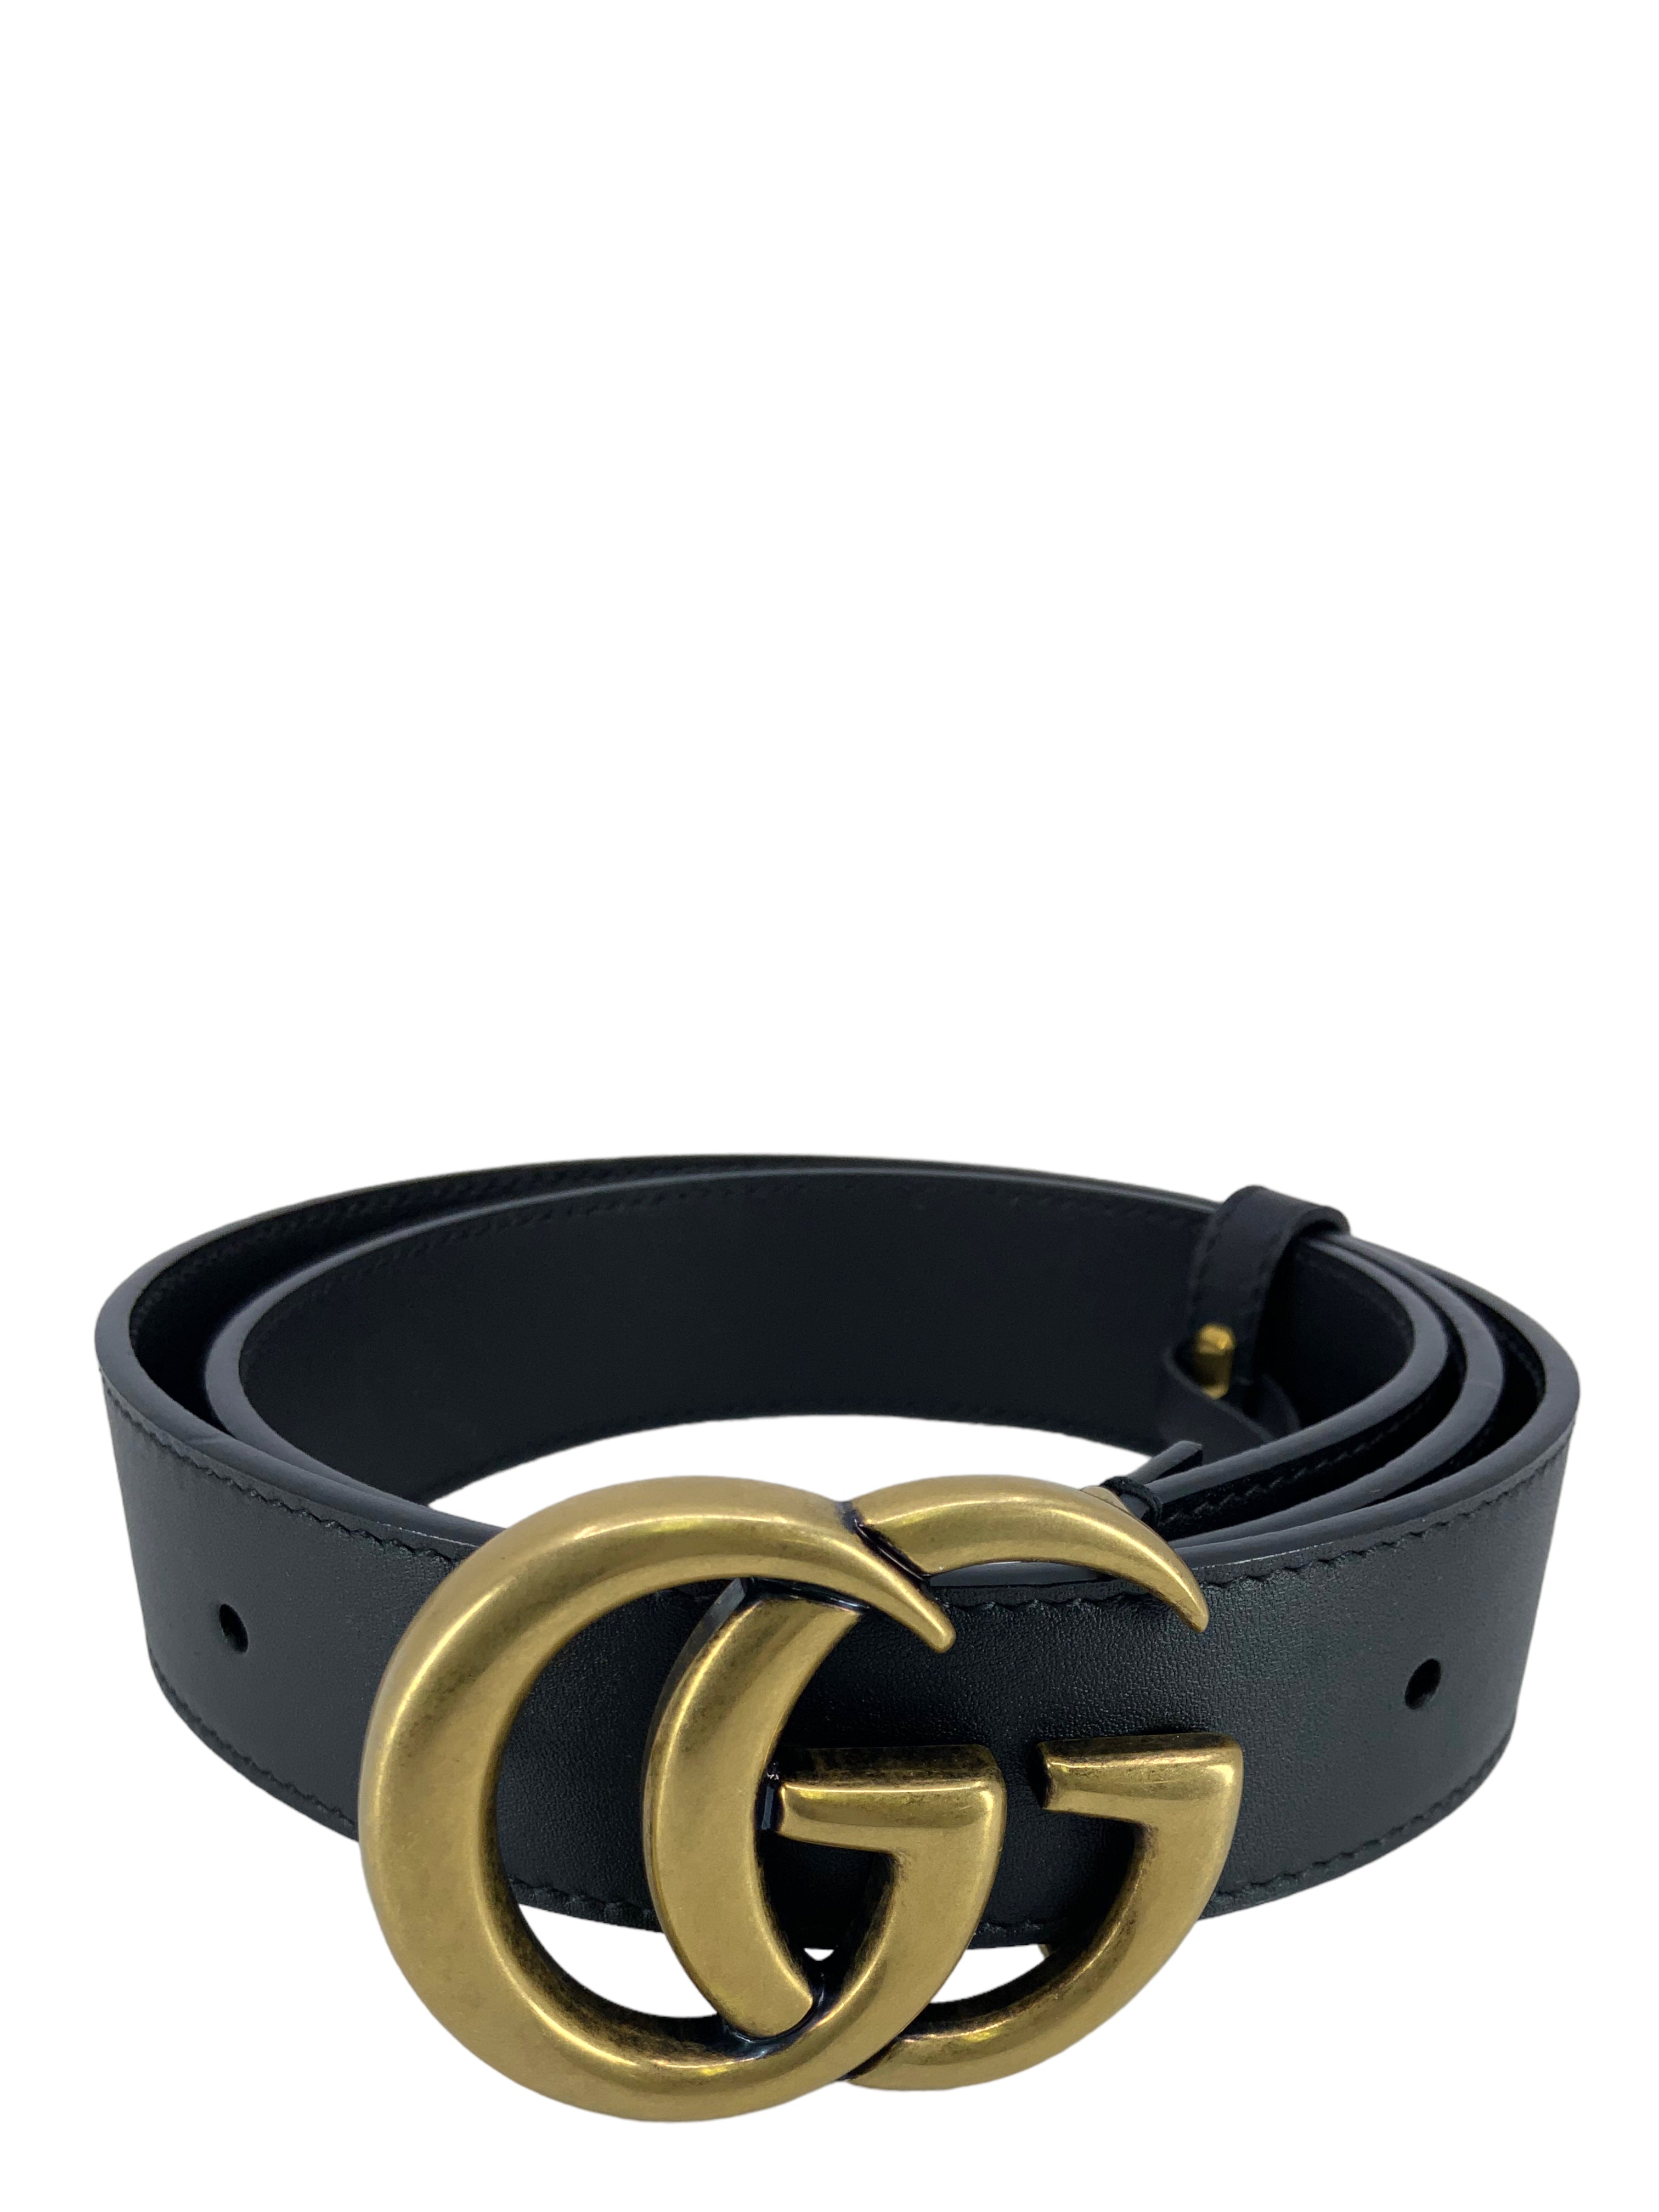 GUCCI GG Marmont Leather Belt Size 75 - Consigned Designs